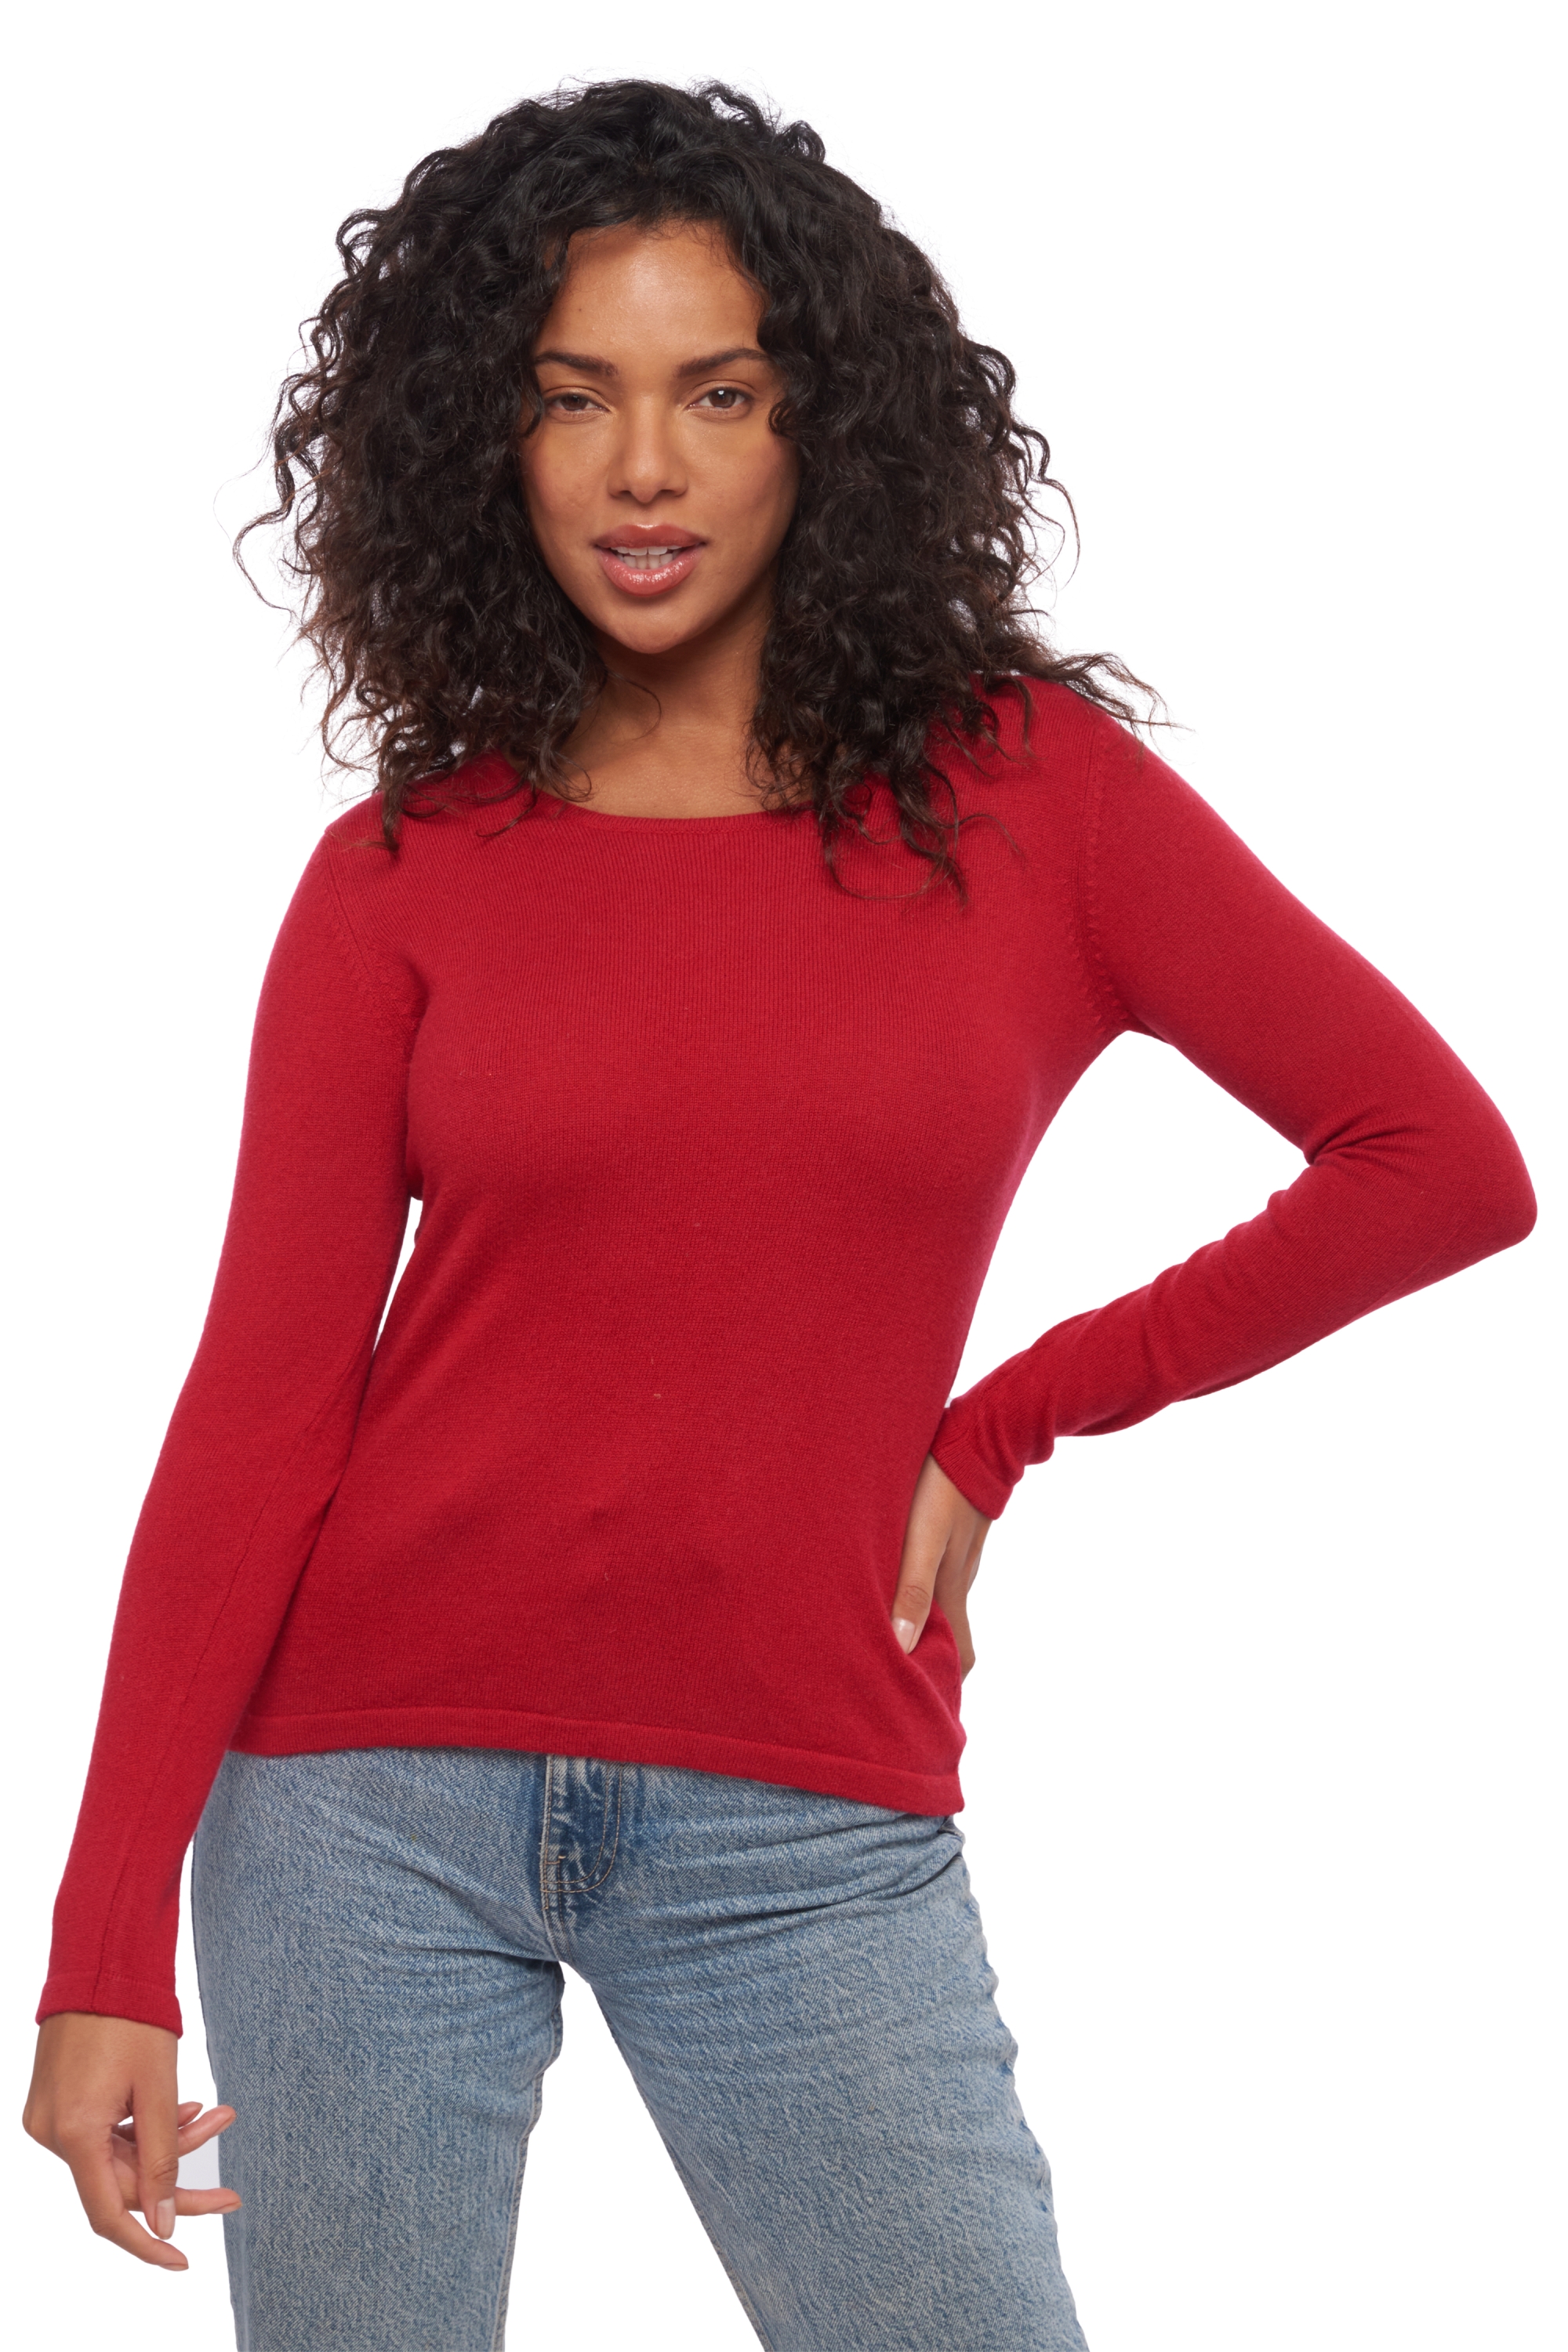 Cashmere ladies timeless classics solange blood red xl